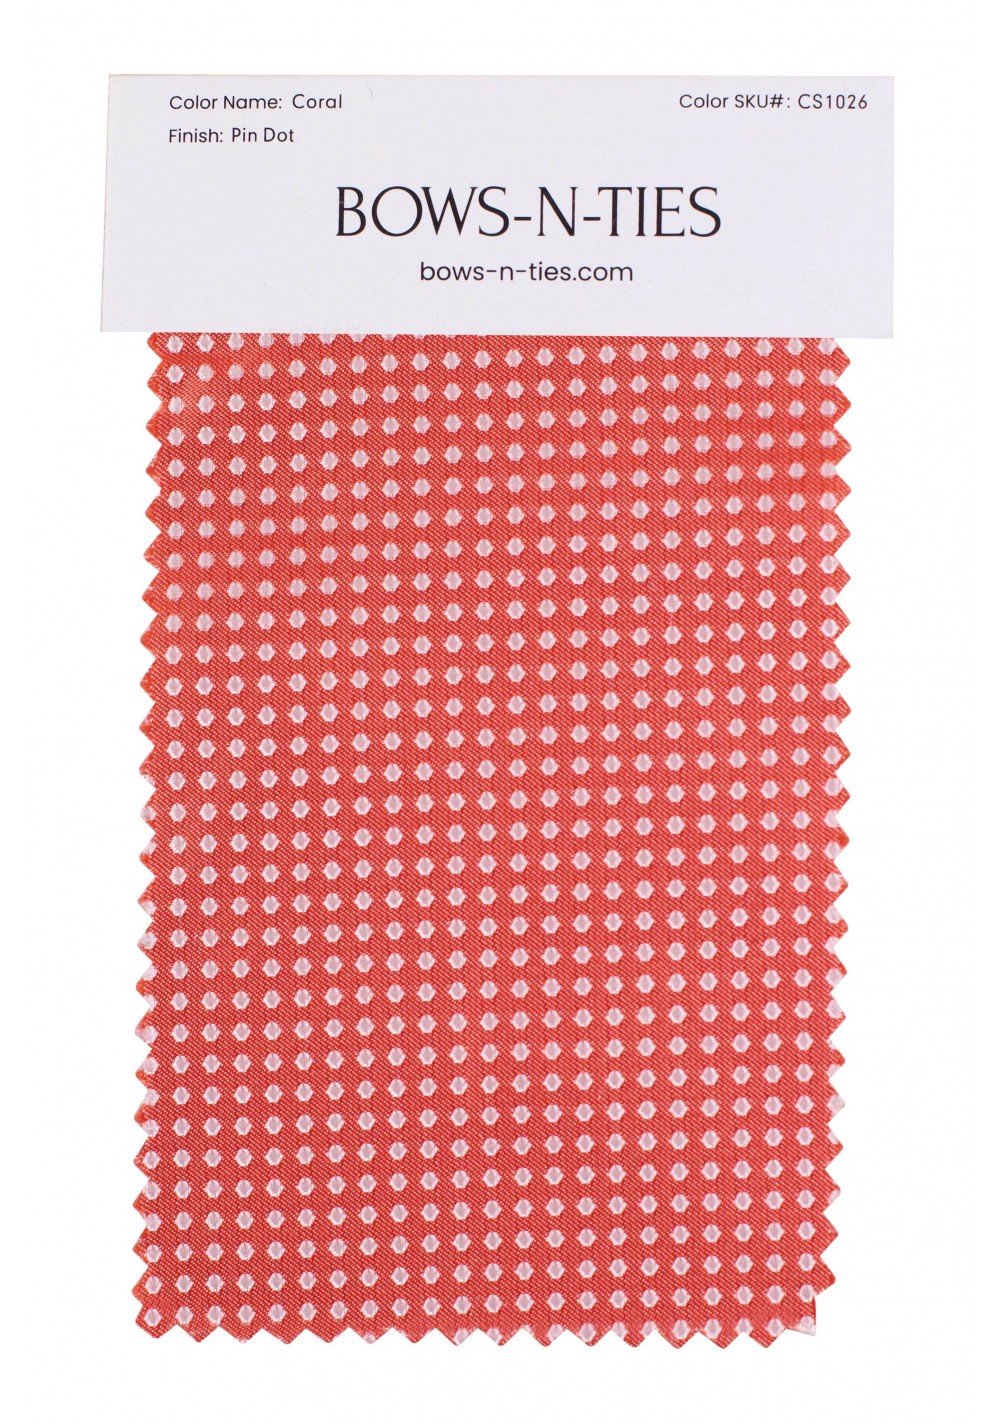 Pin Dot Fabric Swatch - Coral